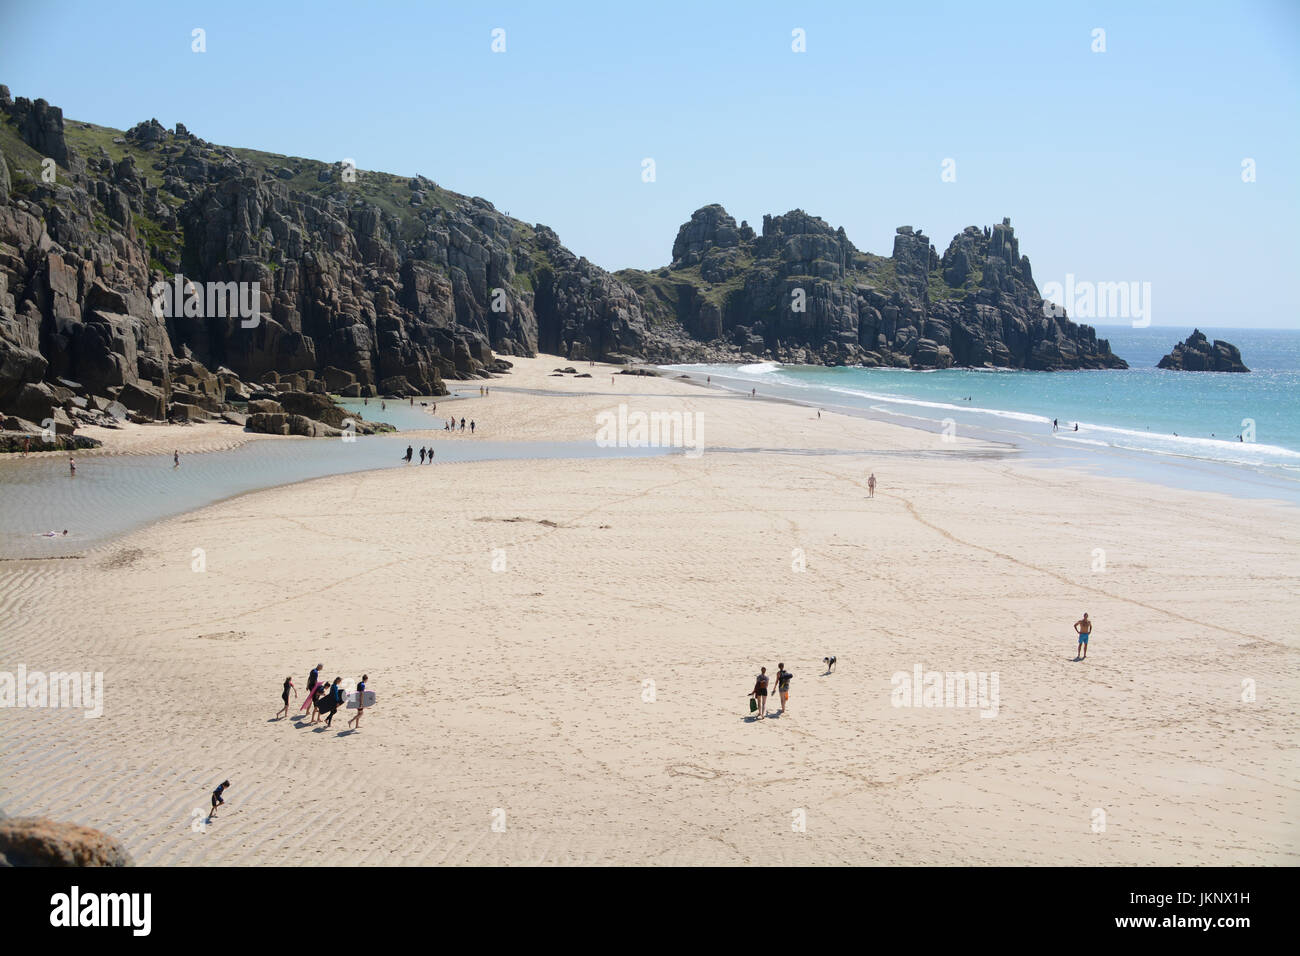 Treen, Cornwall, UK. 24th July 2017. UK Weather. With monday looking to be the best day of the week, tourists made their way down to the turquoise waters at Treen Beach, with many German holiday makers amongst them. Credit: cwallpix/Alamy Live News Stock Photo